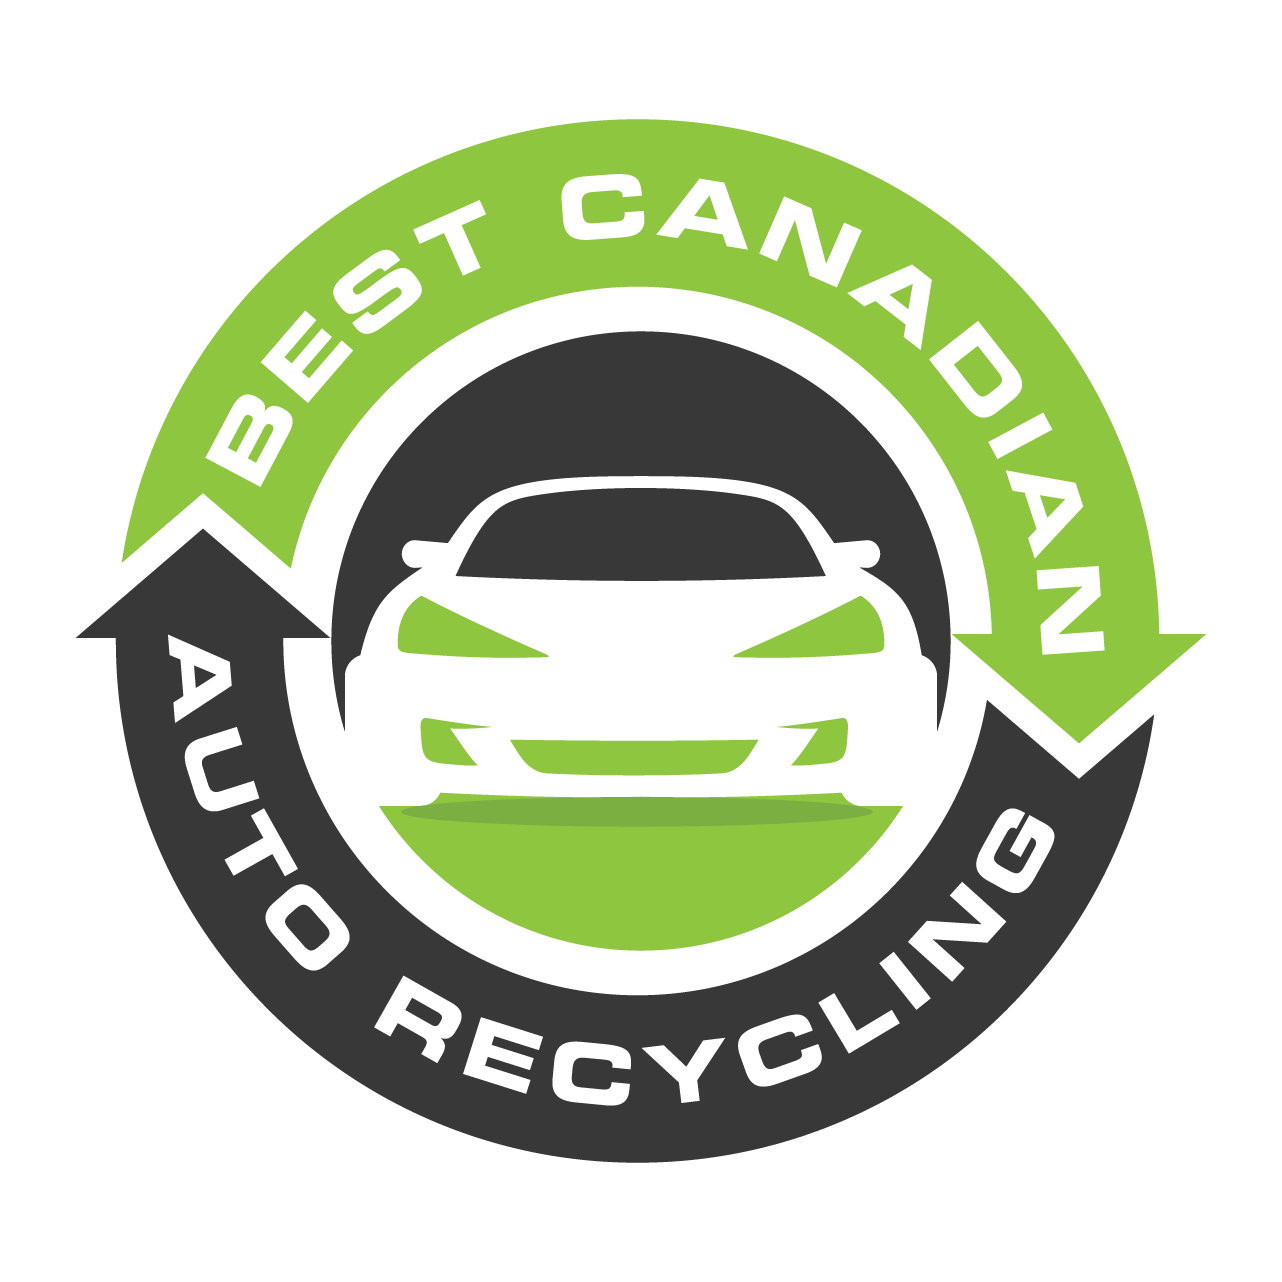 BEST CANADIAN AUTO RECYCLING INC.